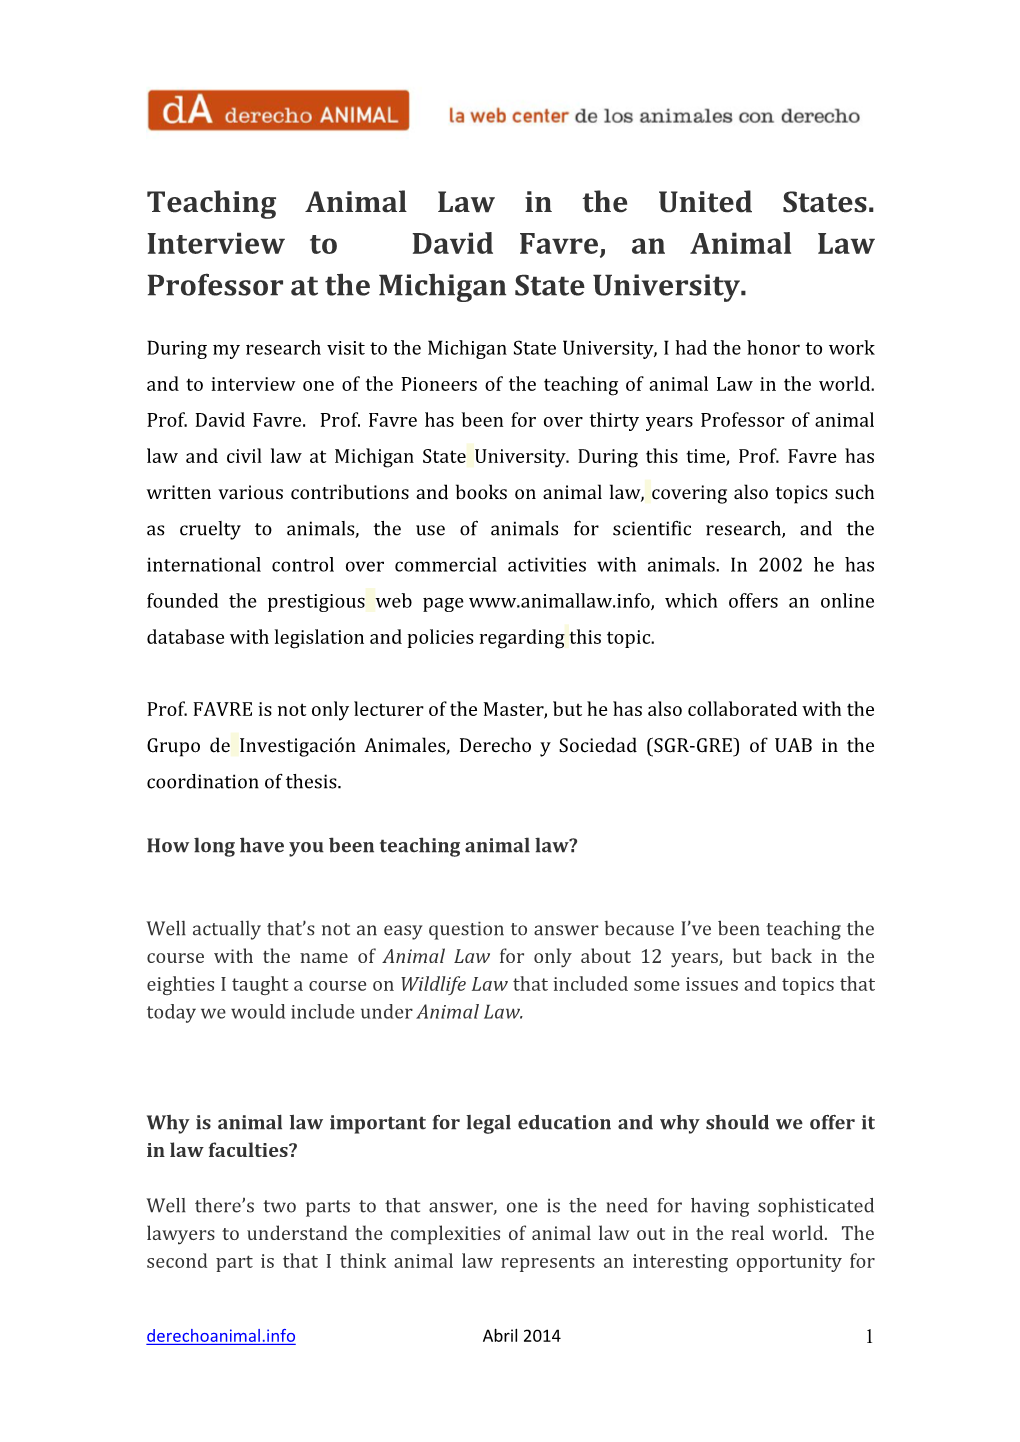 Teaching Animal Law in the United States. Interview to David Favre, an Animal Law Professor at the Michigan State University